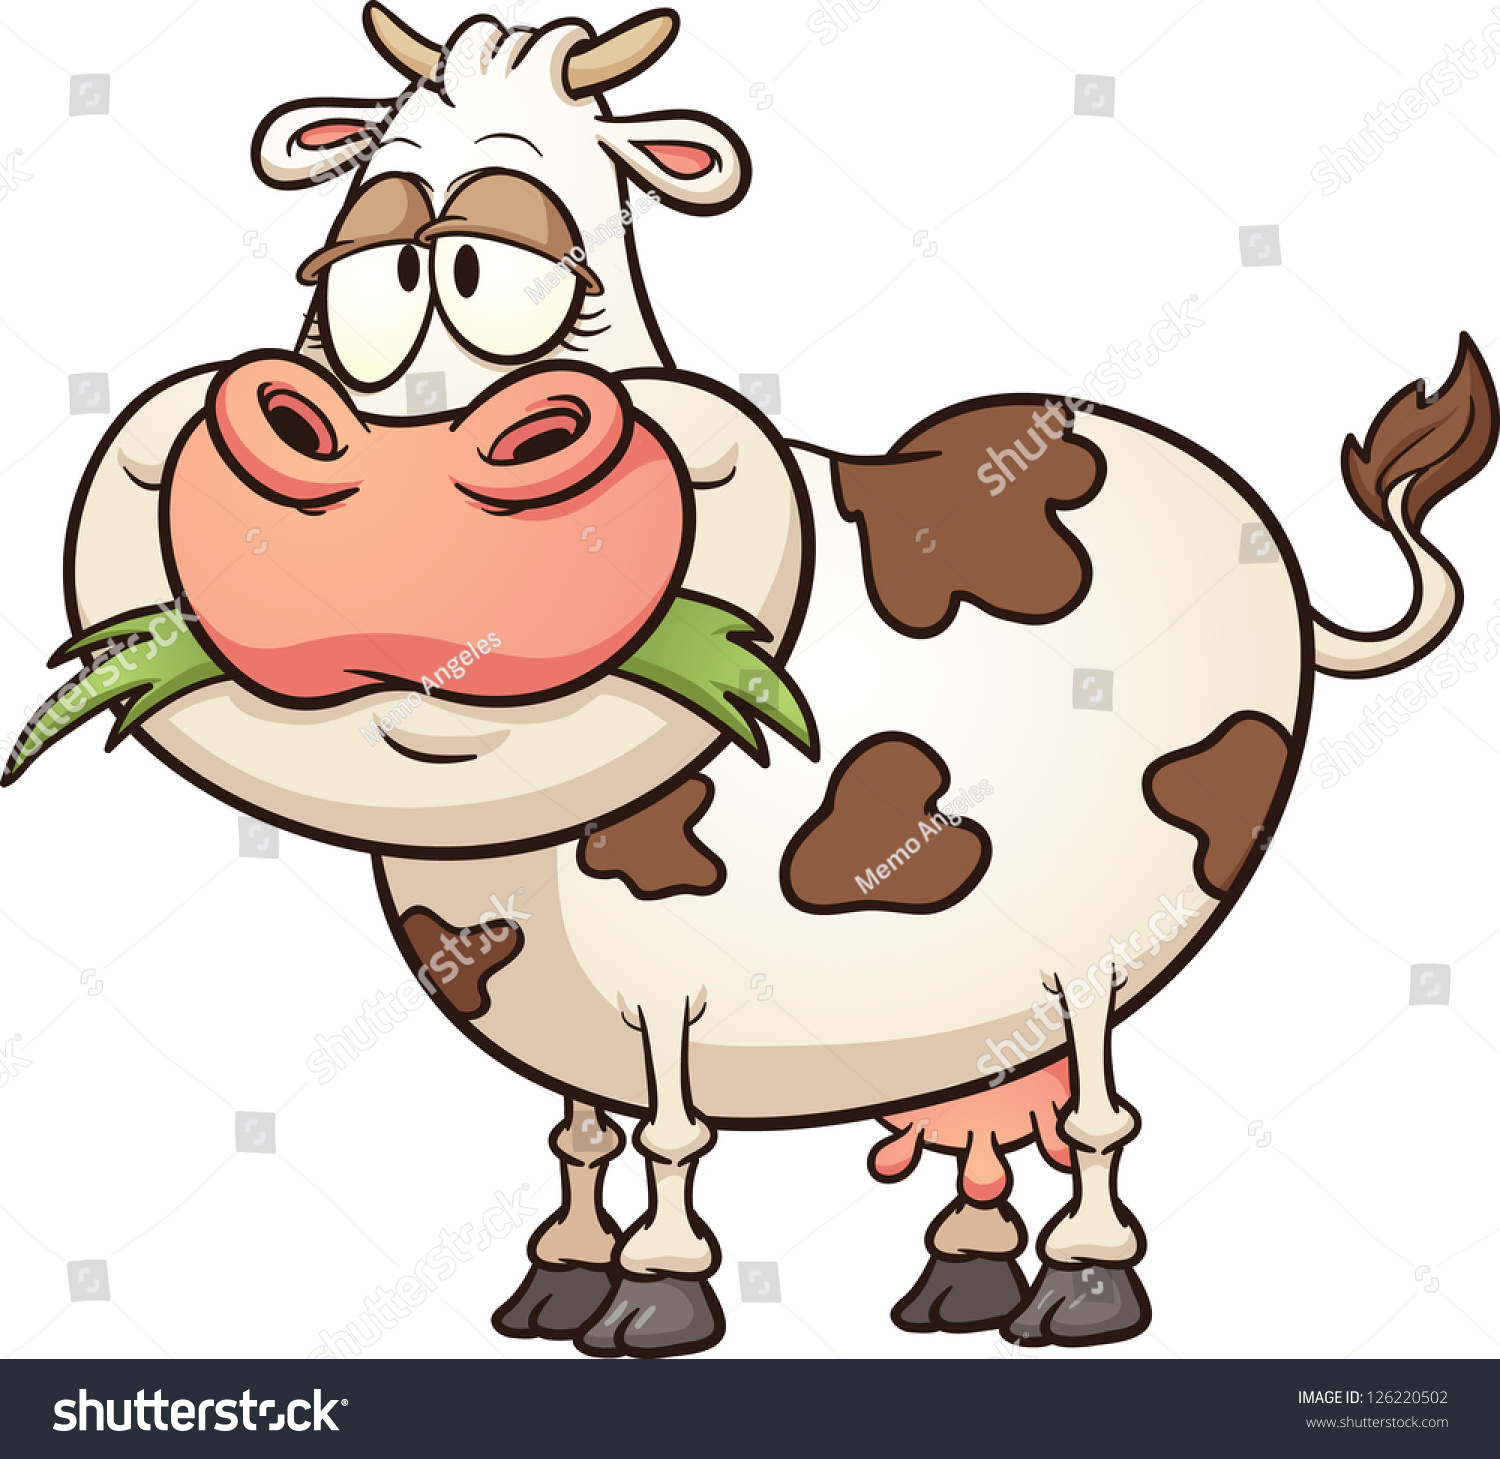 cow patty clipart - photo #2